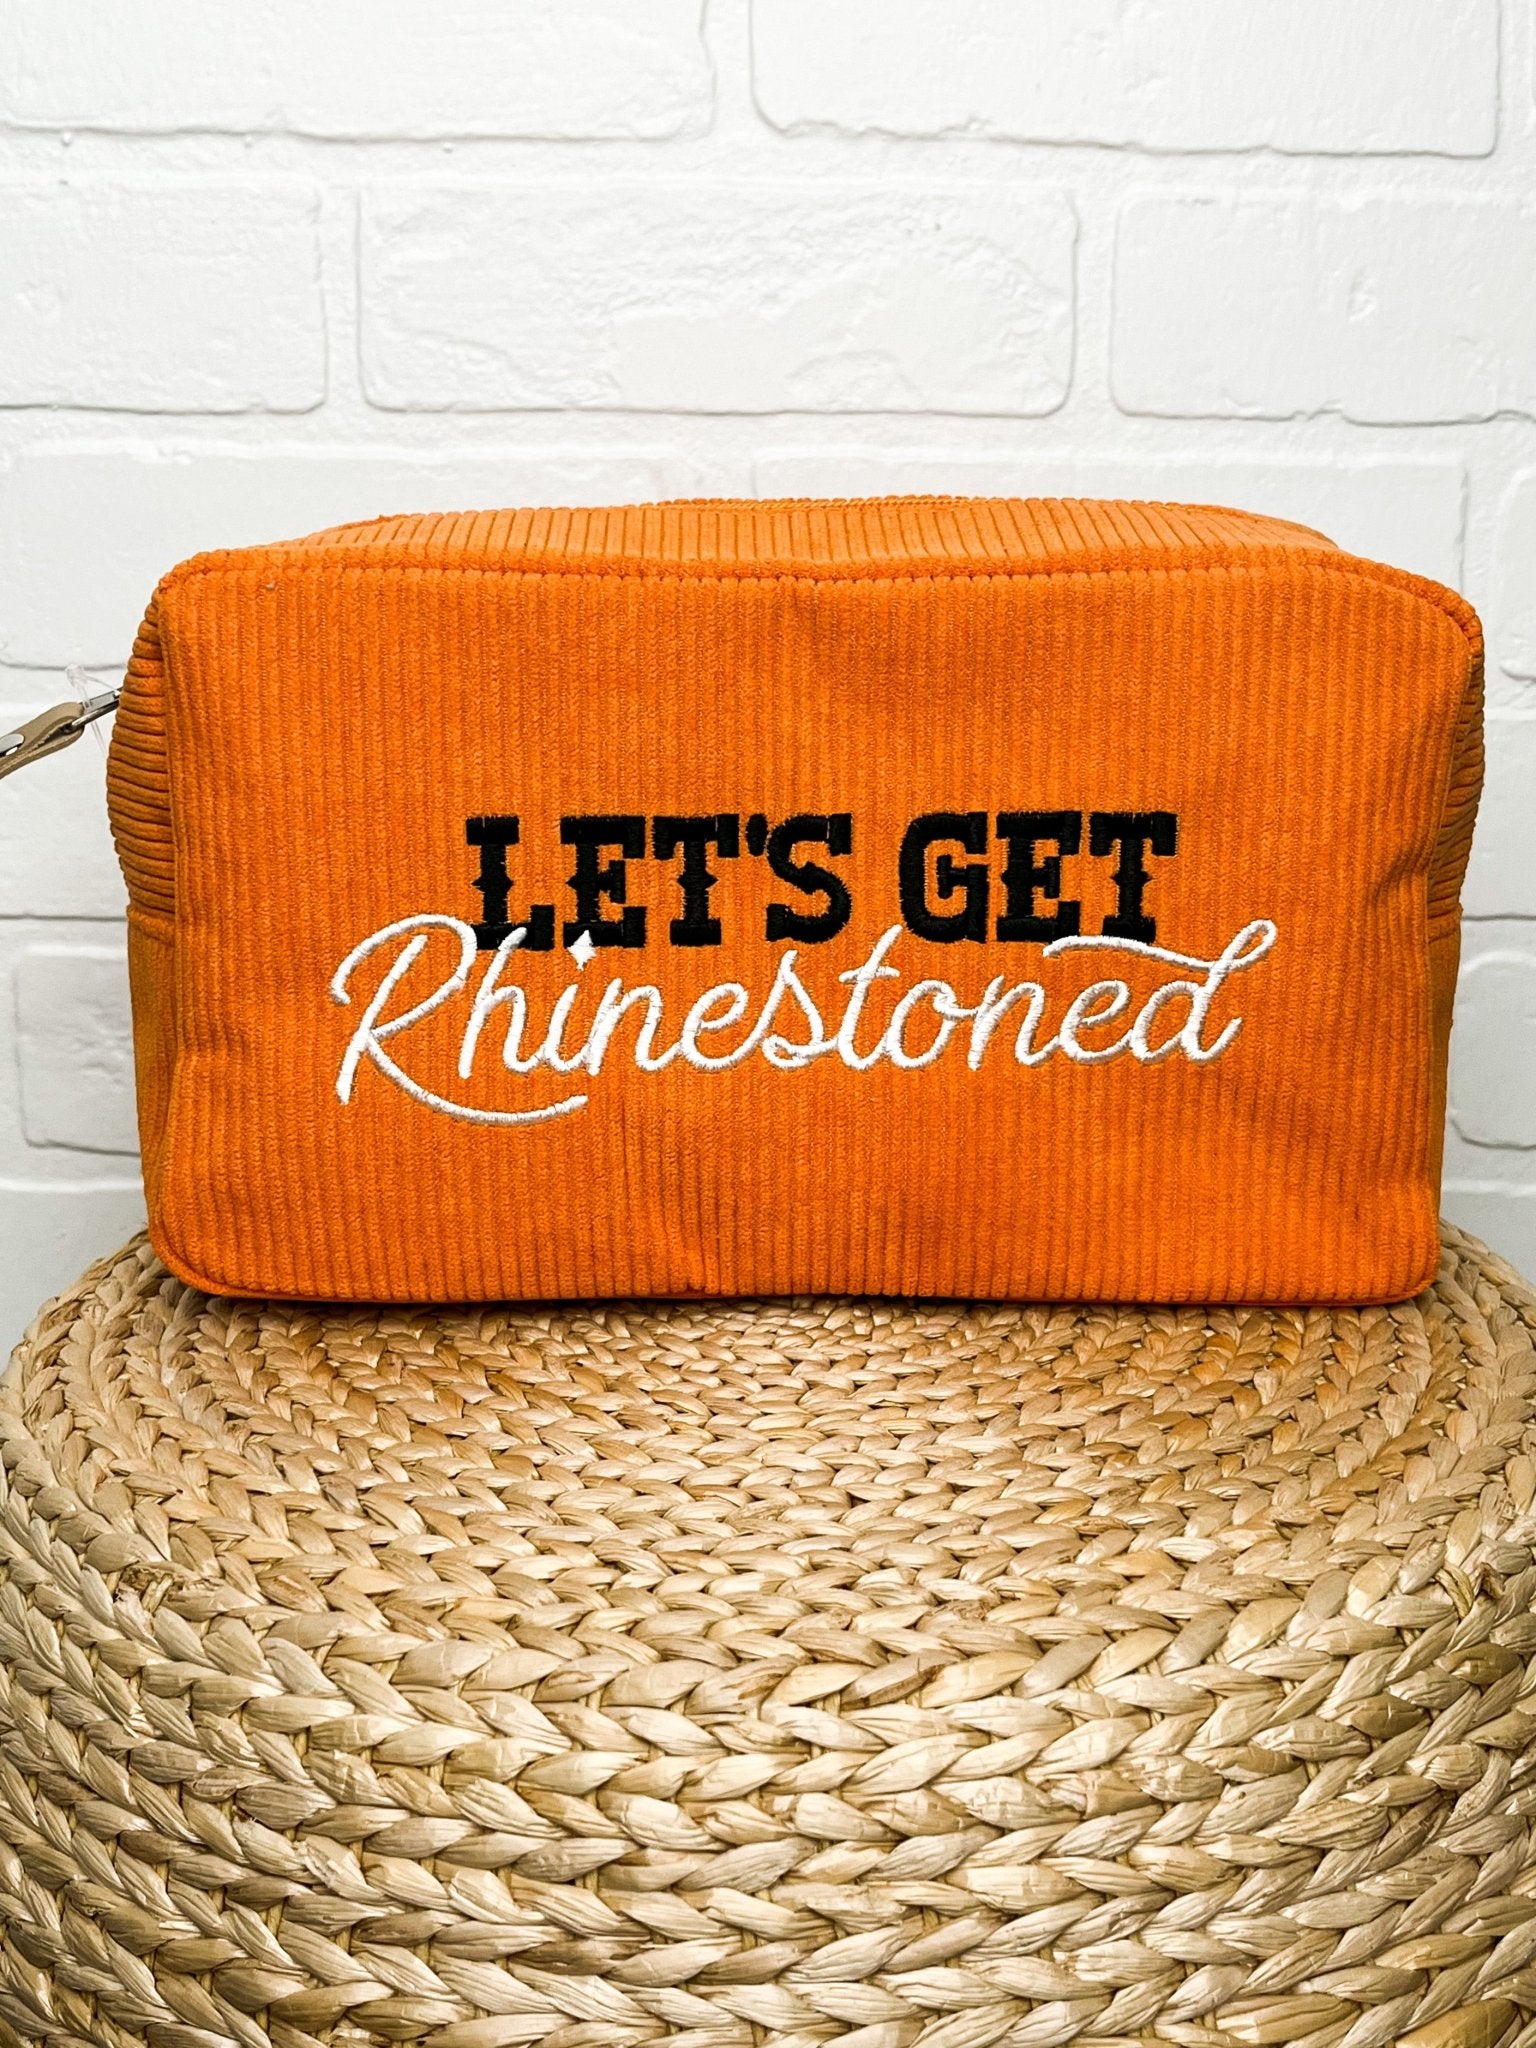 Let's get rhinestoned cosmetic bag orange - Trendy Bags at Lush Fashion Lounge Boutique in Oklahoma City